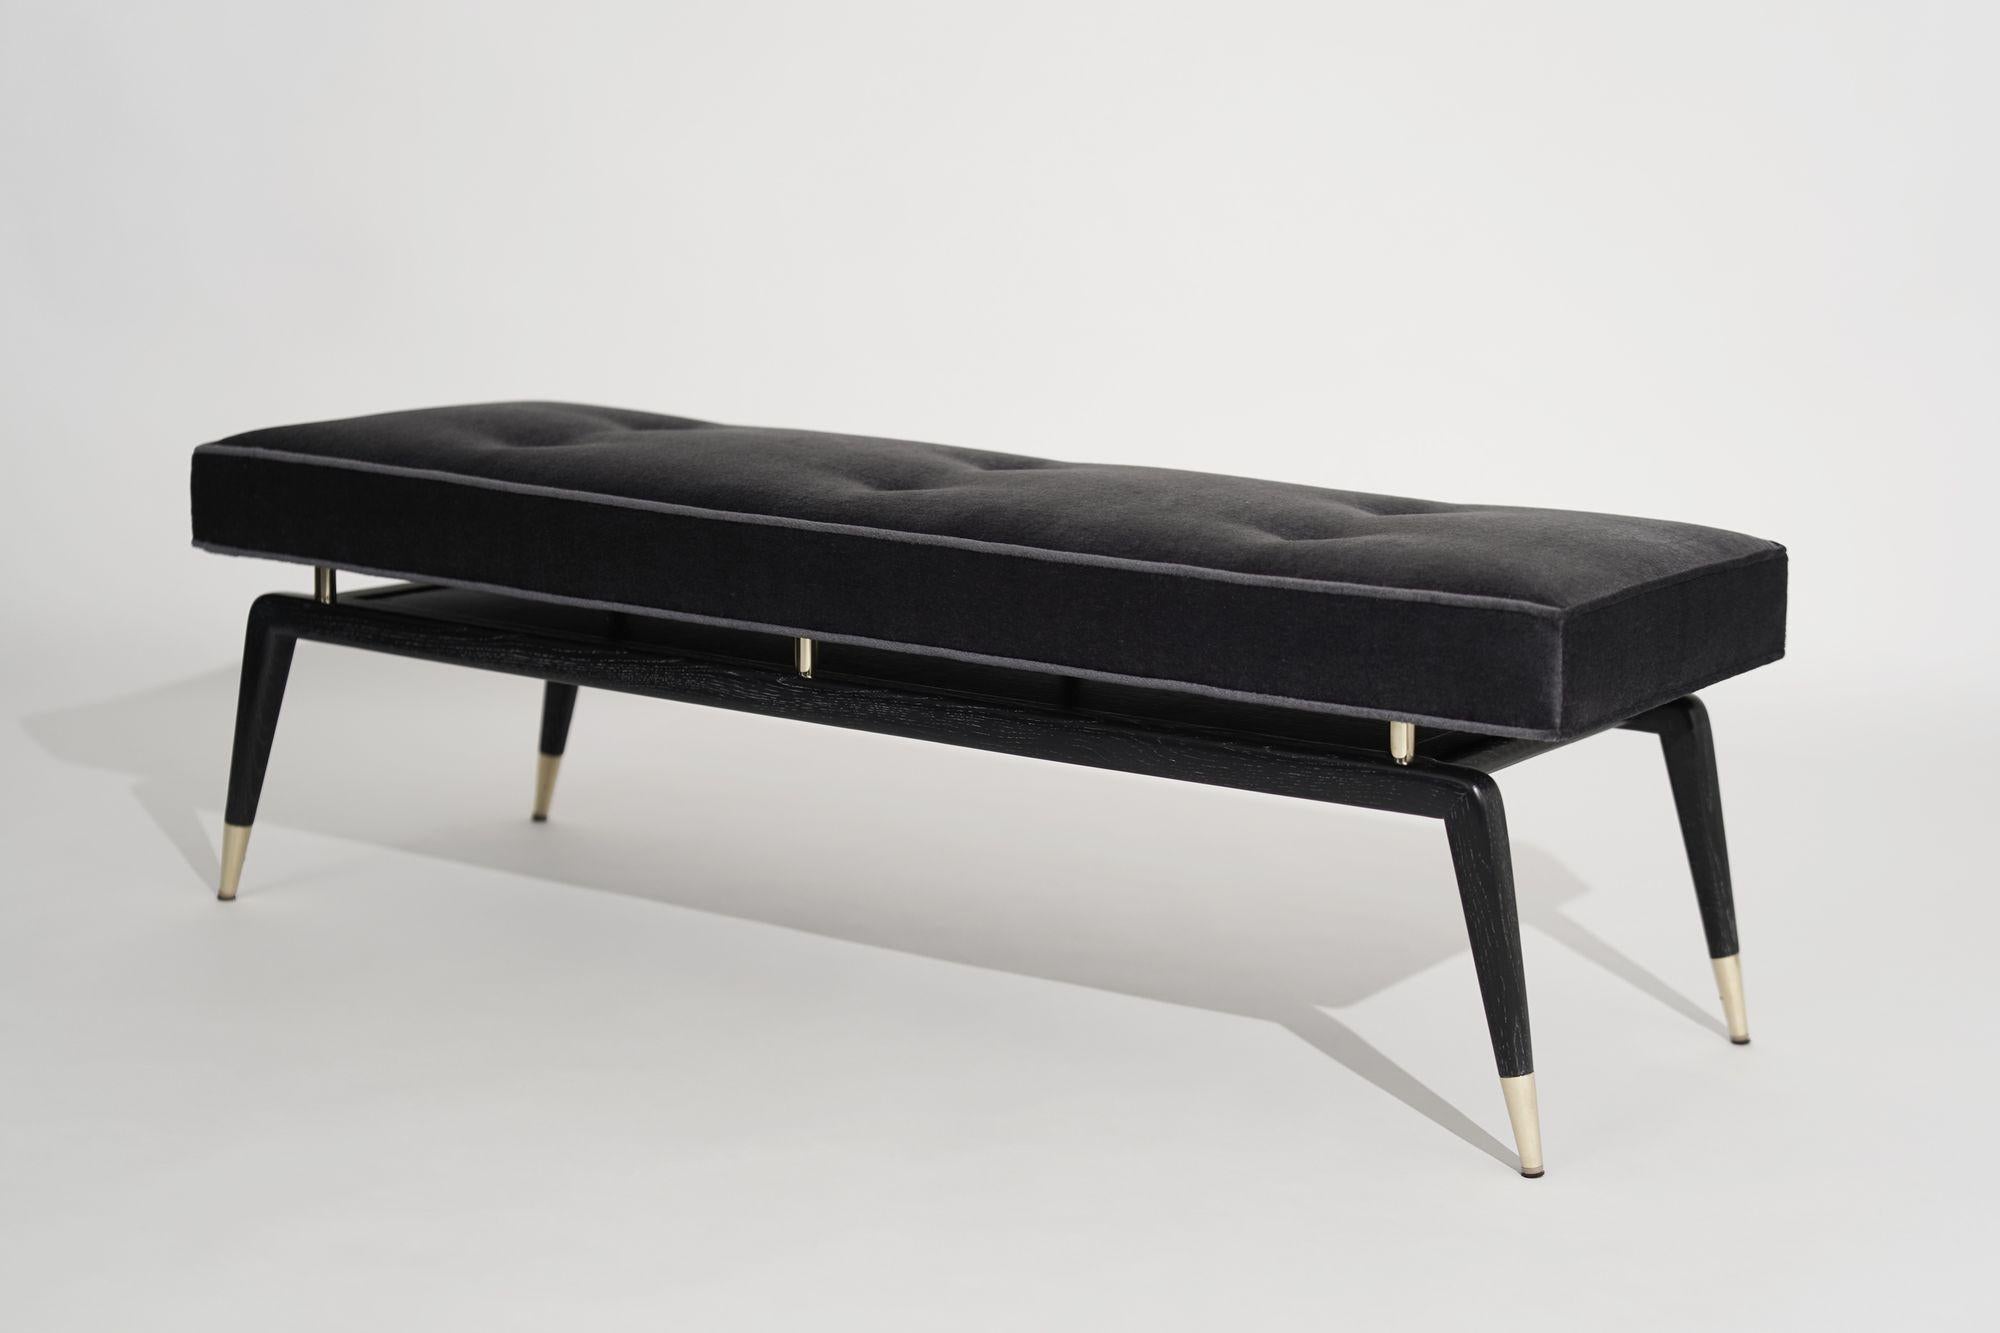 Elevate your space with airy innovation. The Gio Bench is inspired by Gio Ponti – a visionary leader in Italian design. This floating cushion perches on top of solid brass pillars and hangs over a narrow frame. Charcoal grey mohair compliments the